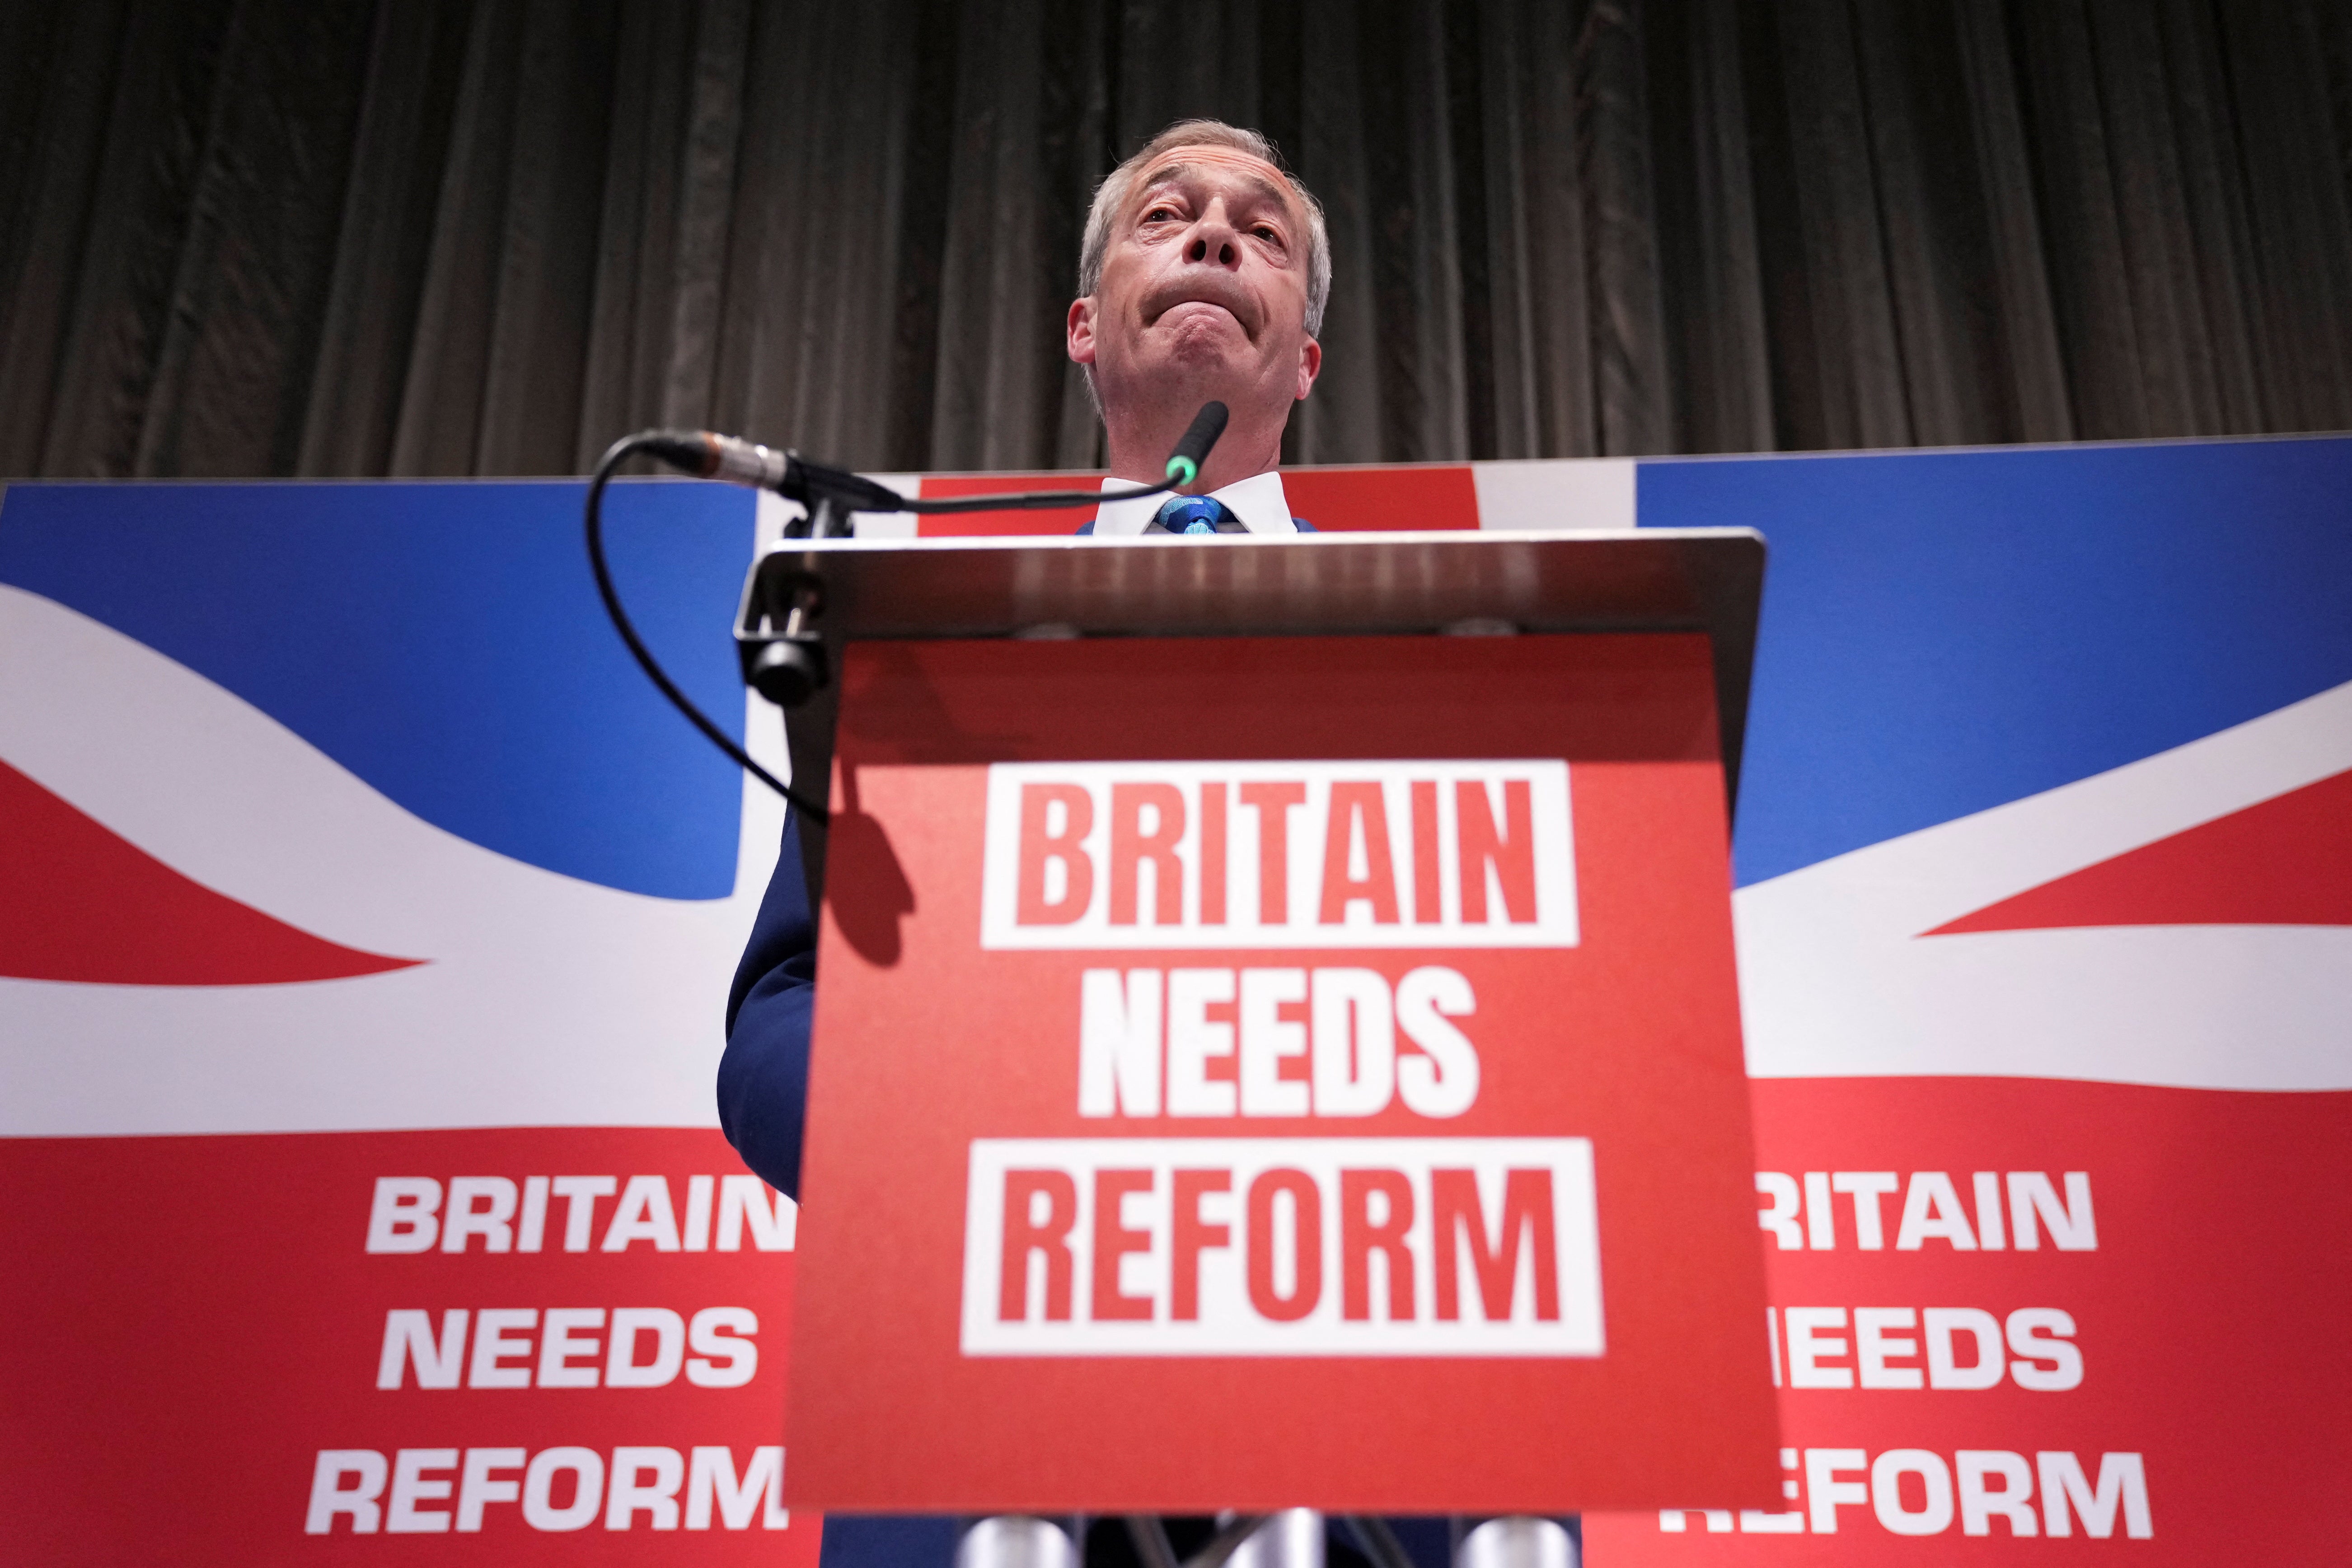 Nigel Farage wants to be leader of the opposition in this election, then win outright in 2029